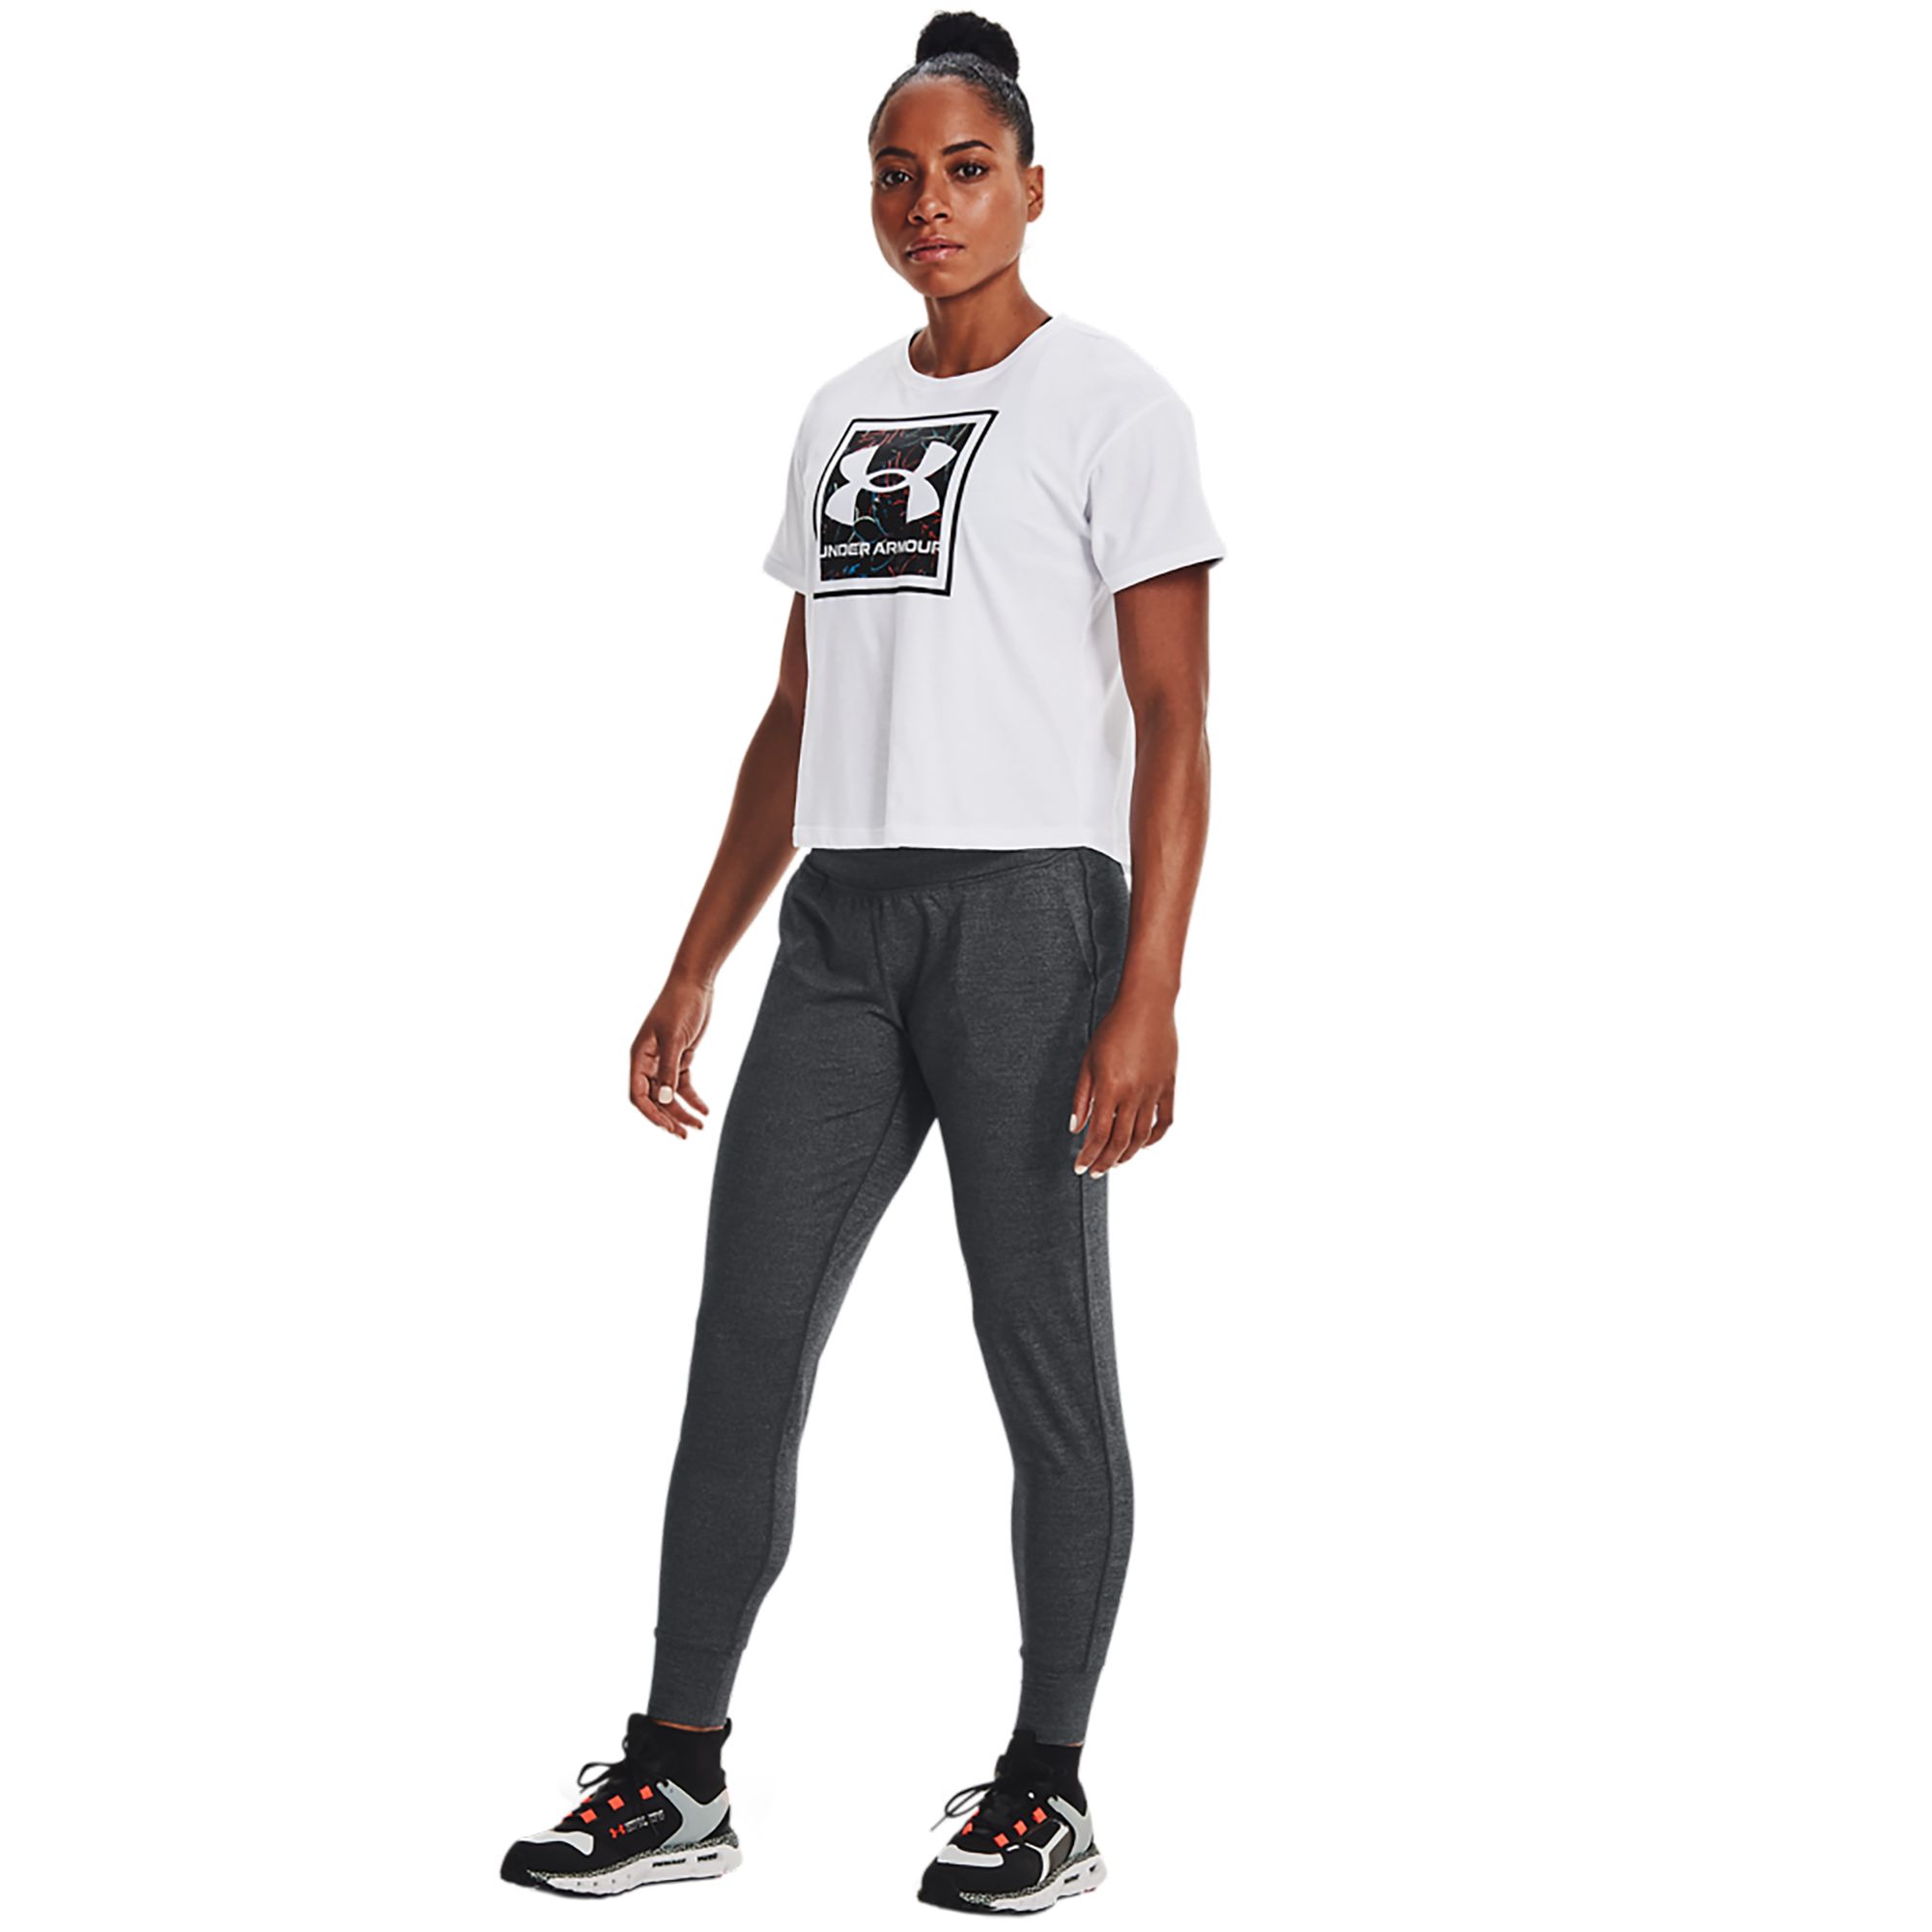 Under Armour Womens Meridian Jogger